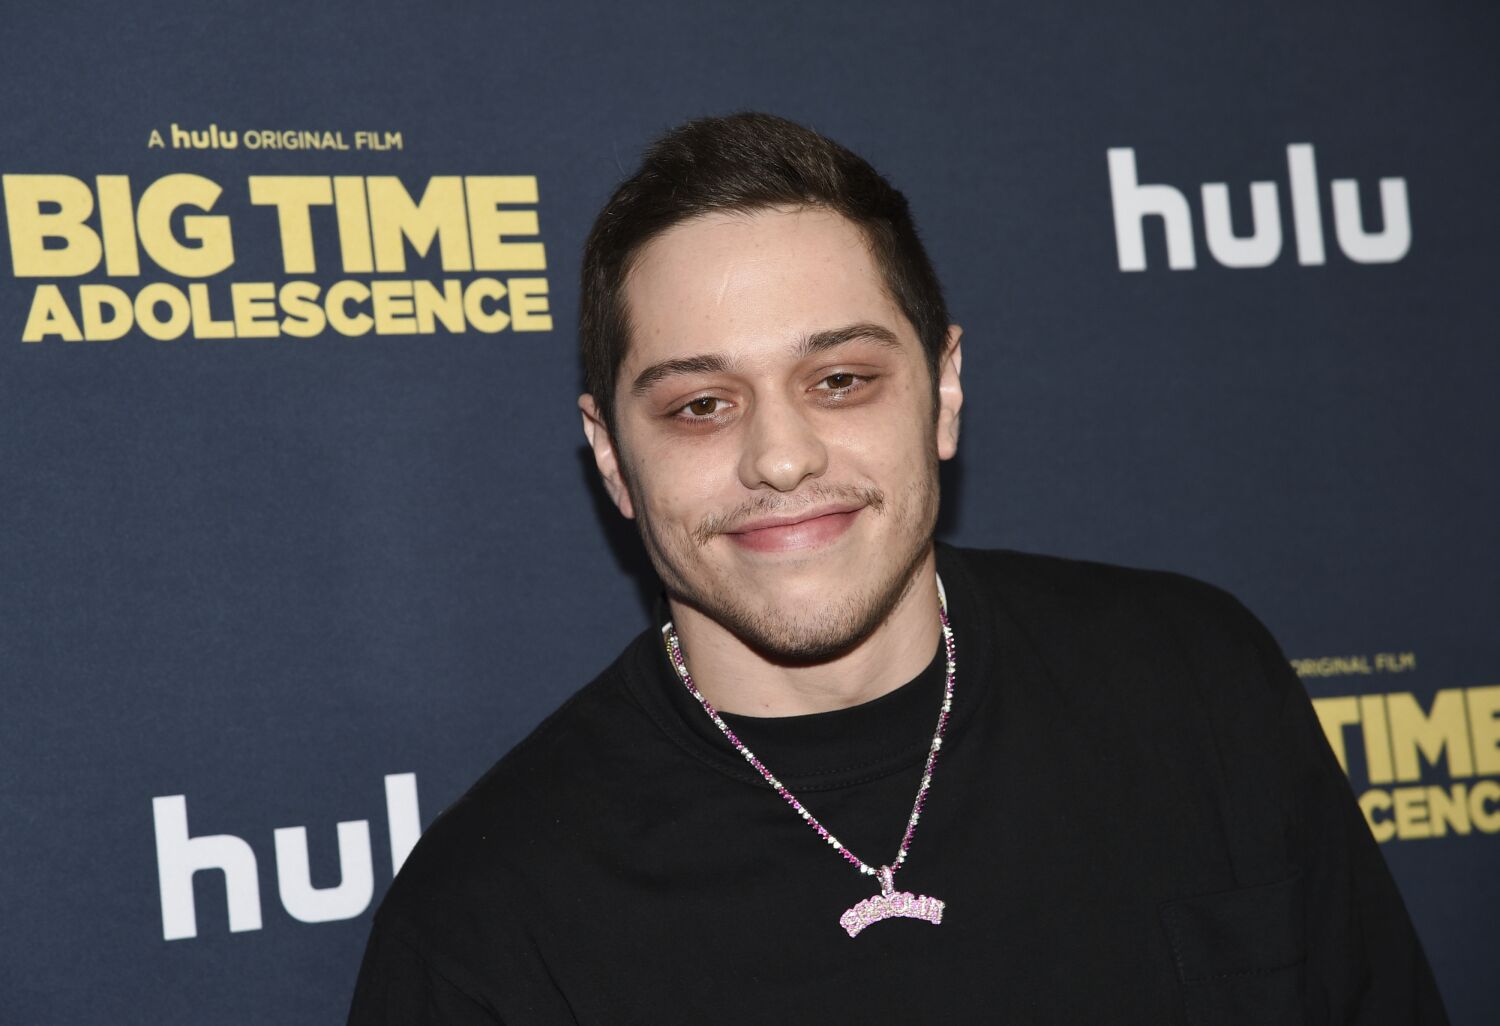 Yes, Pete Davidson is returning to 'Saturday Night Live' ... as host